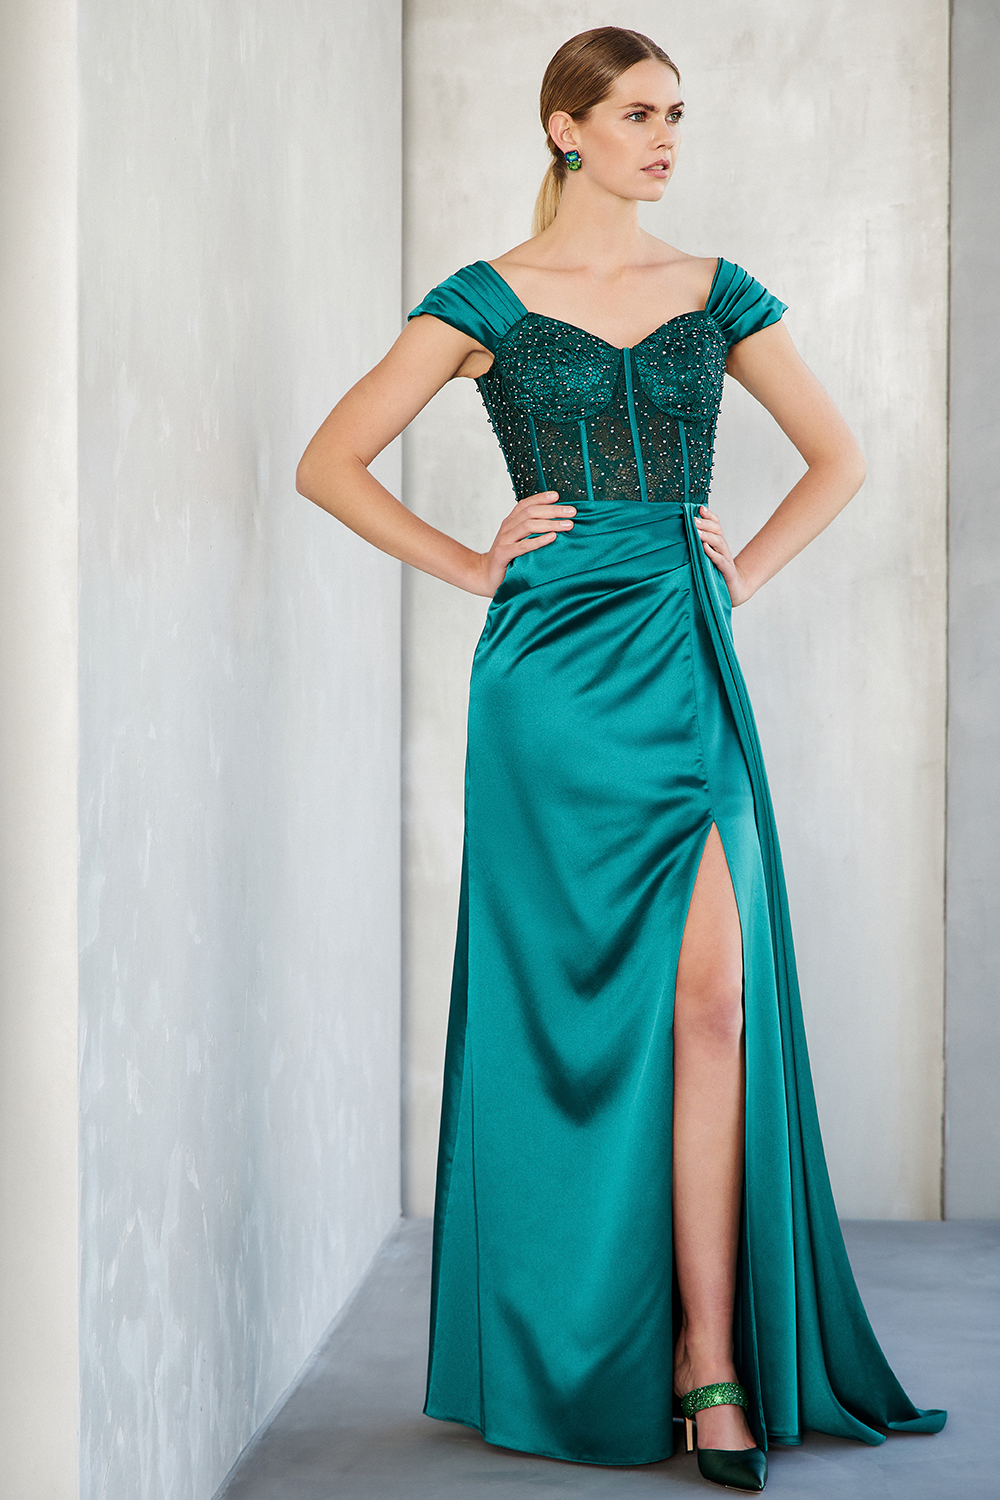 Long evening satin dress with lace at the top